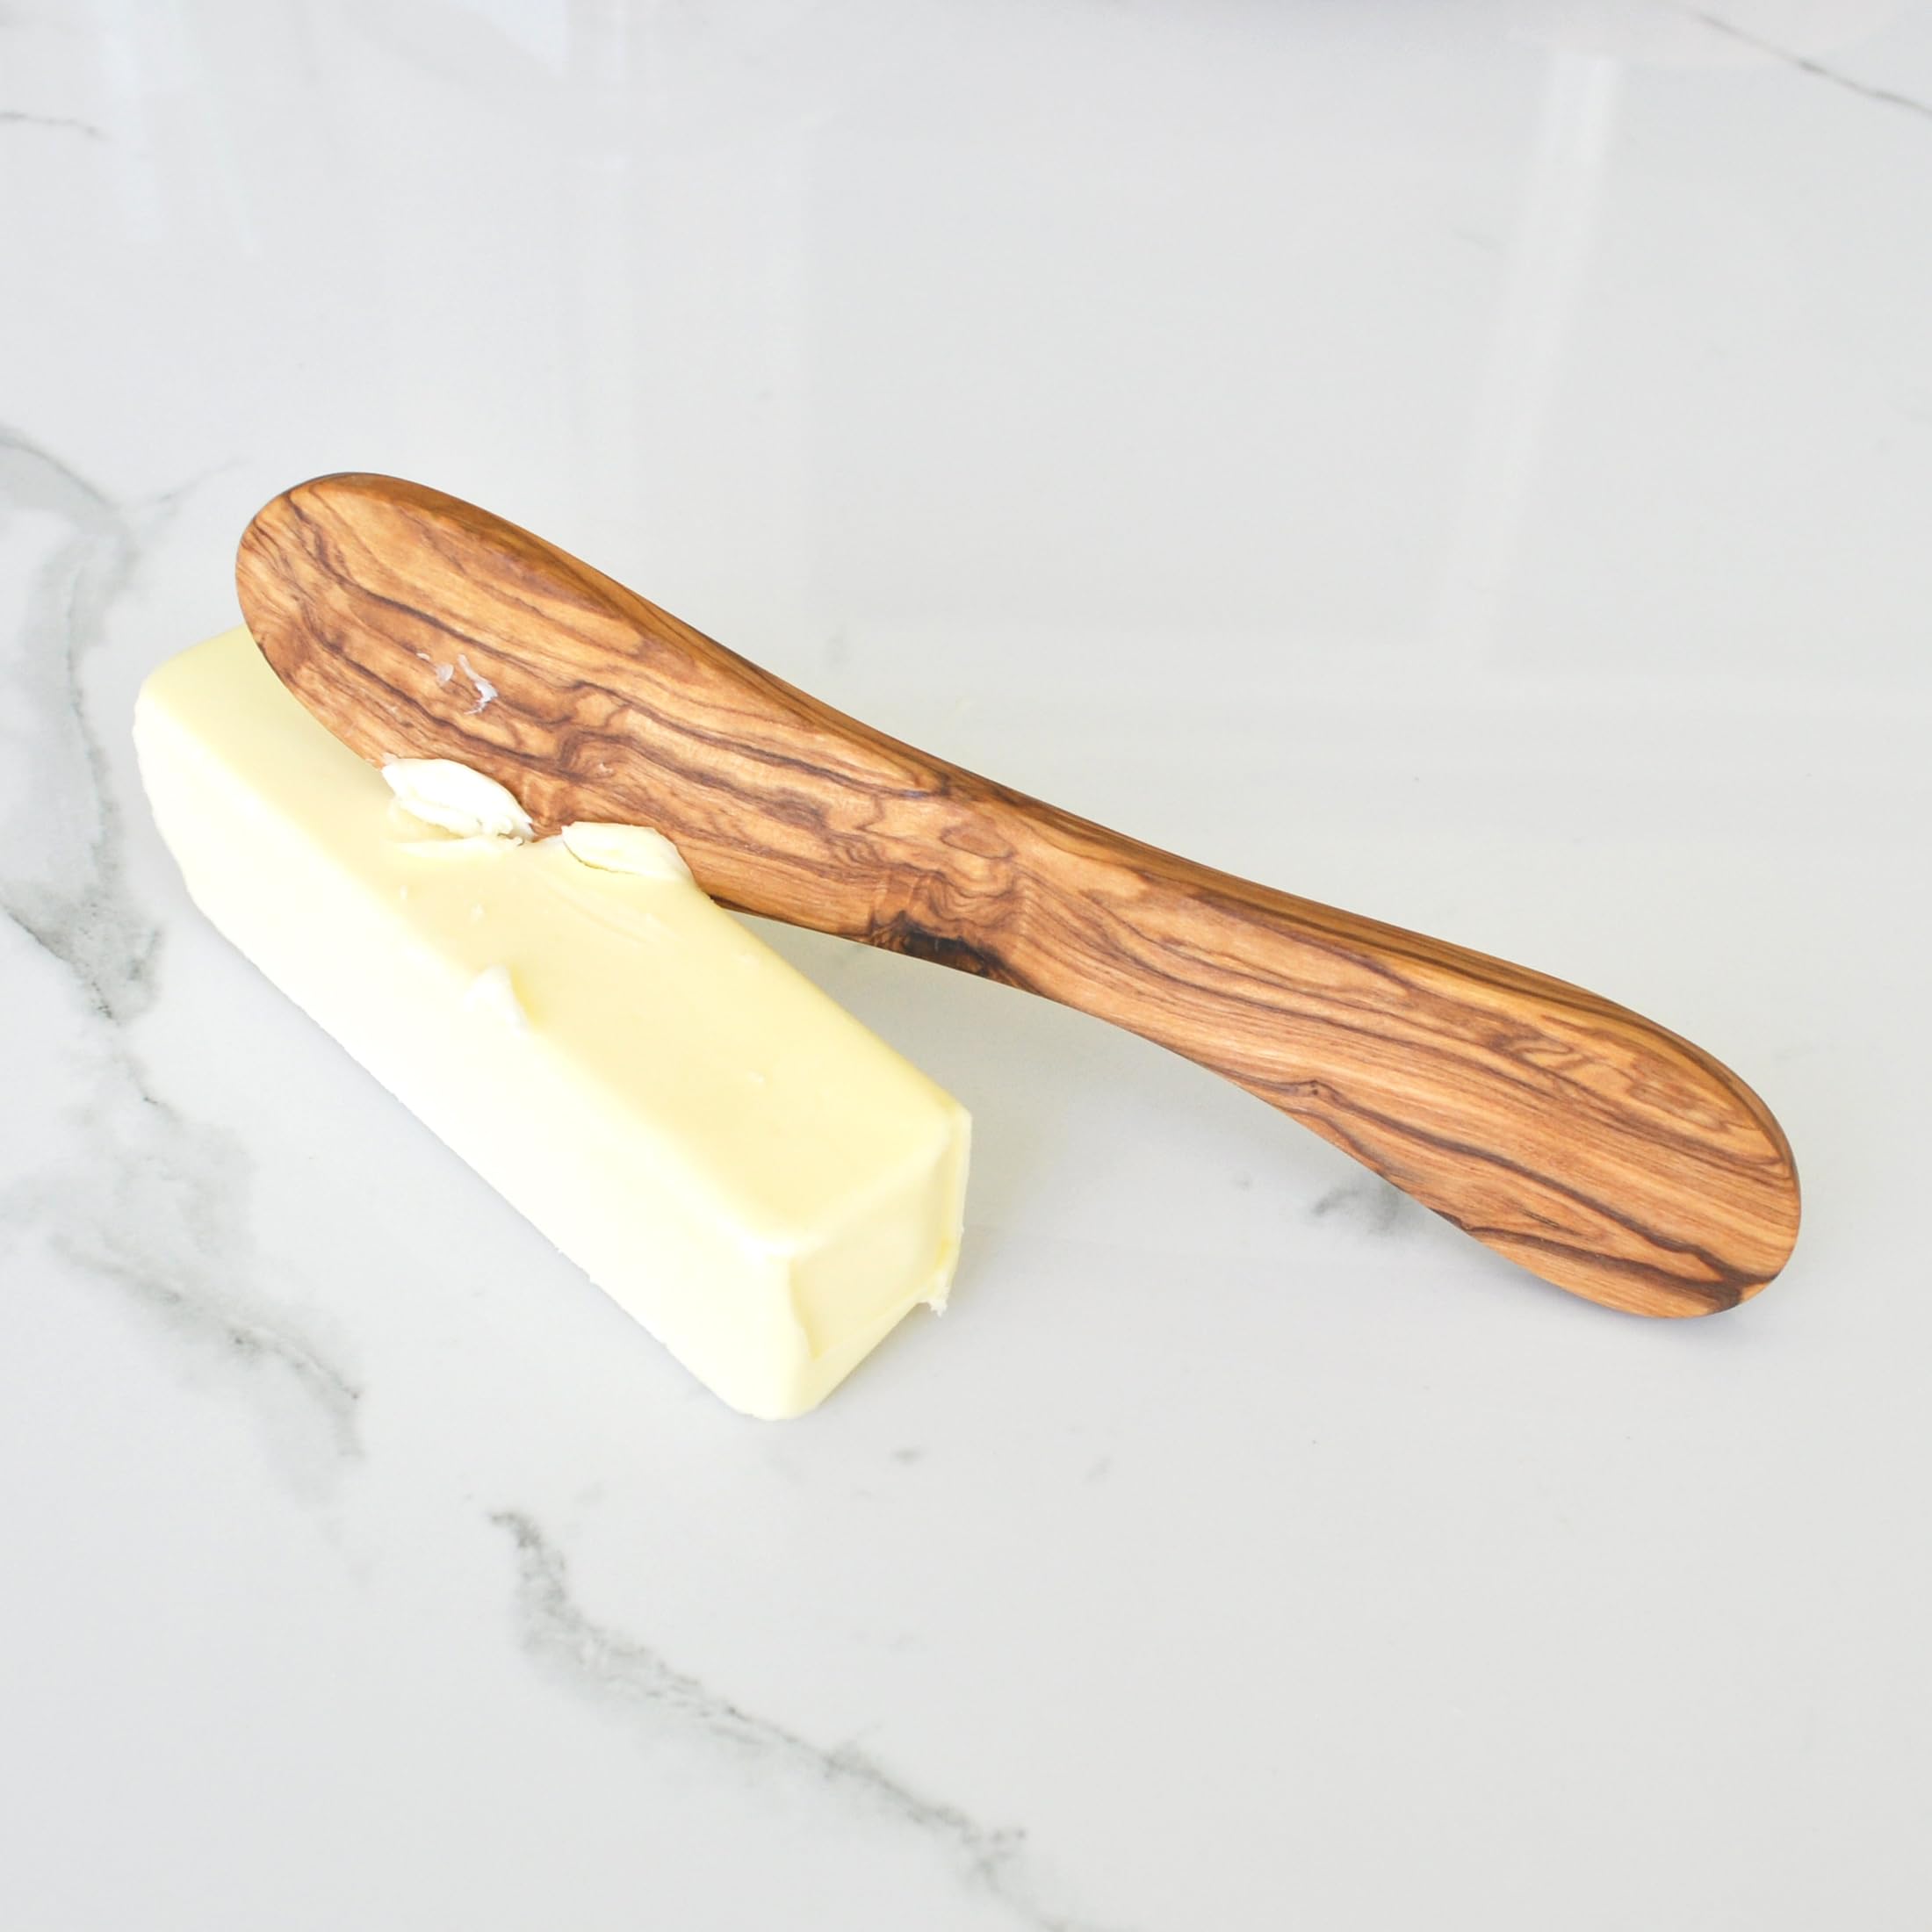 Naturally Med - Olive Wood Butter Knife/Spreader. Great for butter, jam, jelly, peanut butter etc. Handcrafted in Tunisia. Butter spreader.